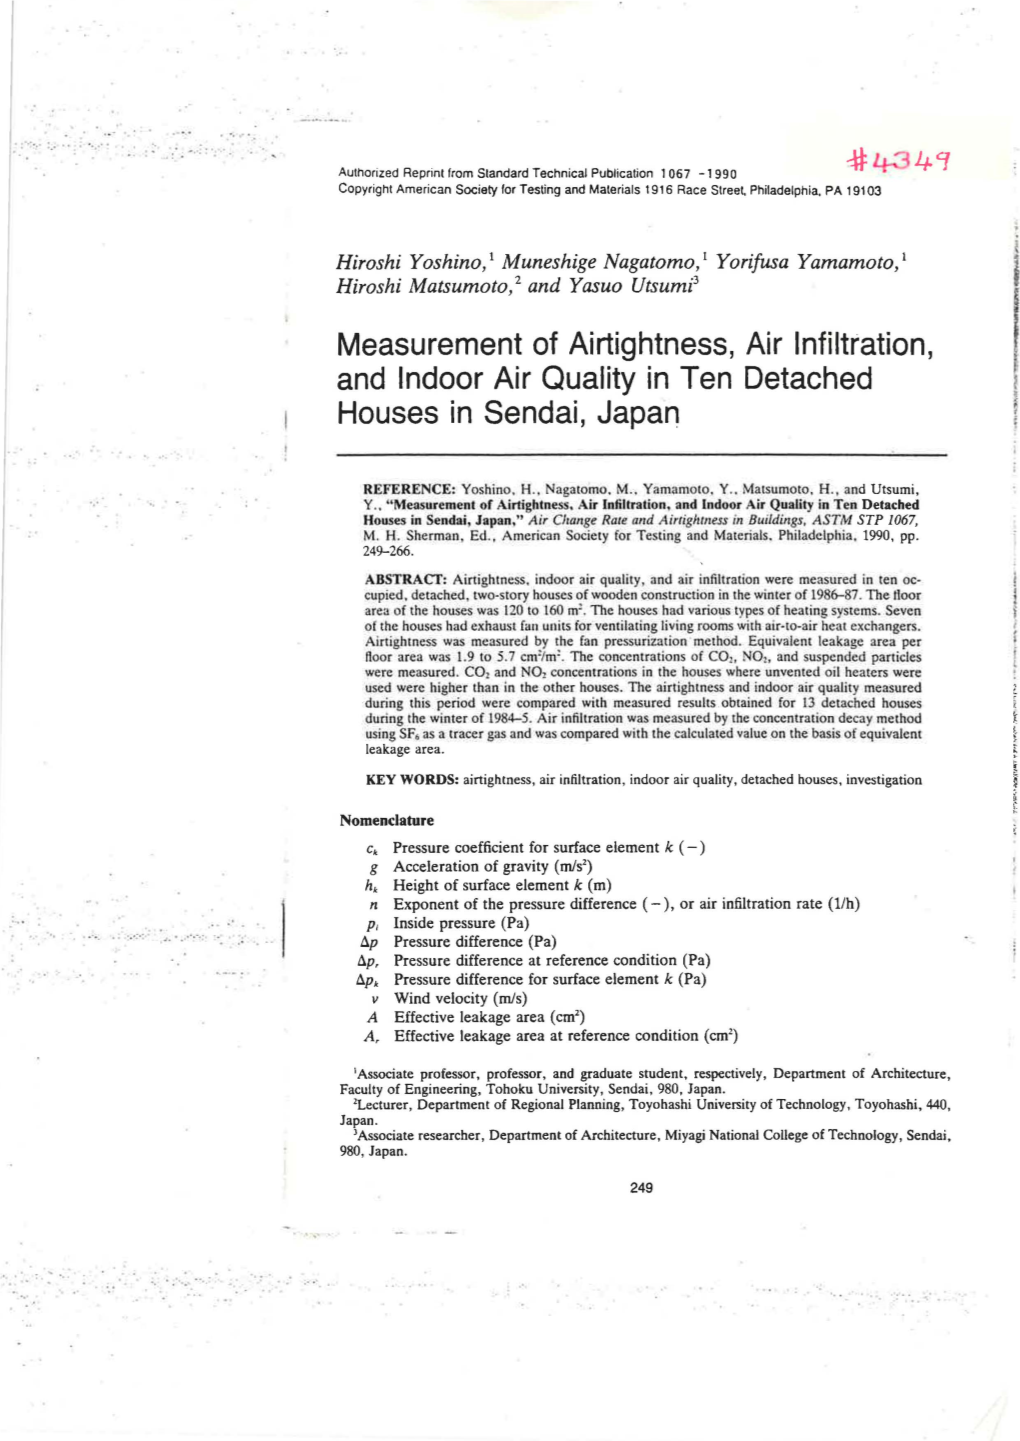 Measurement of Airtightness, Air Infiltration, and Indoor Air Quality in Ten Detached Houses in Sendai, Japan